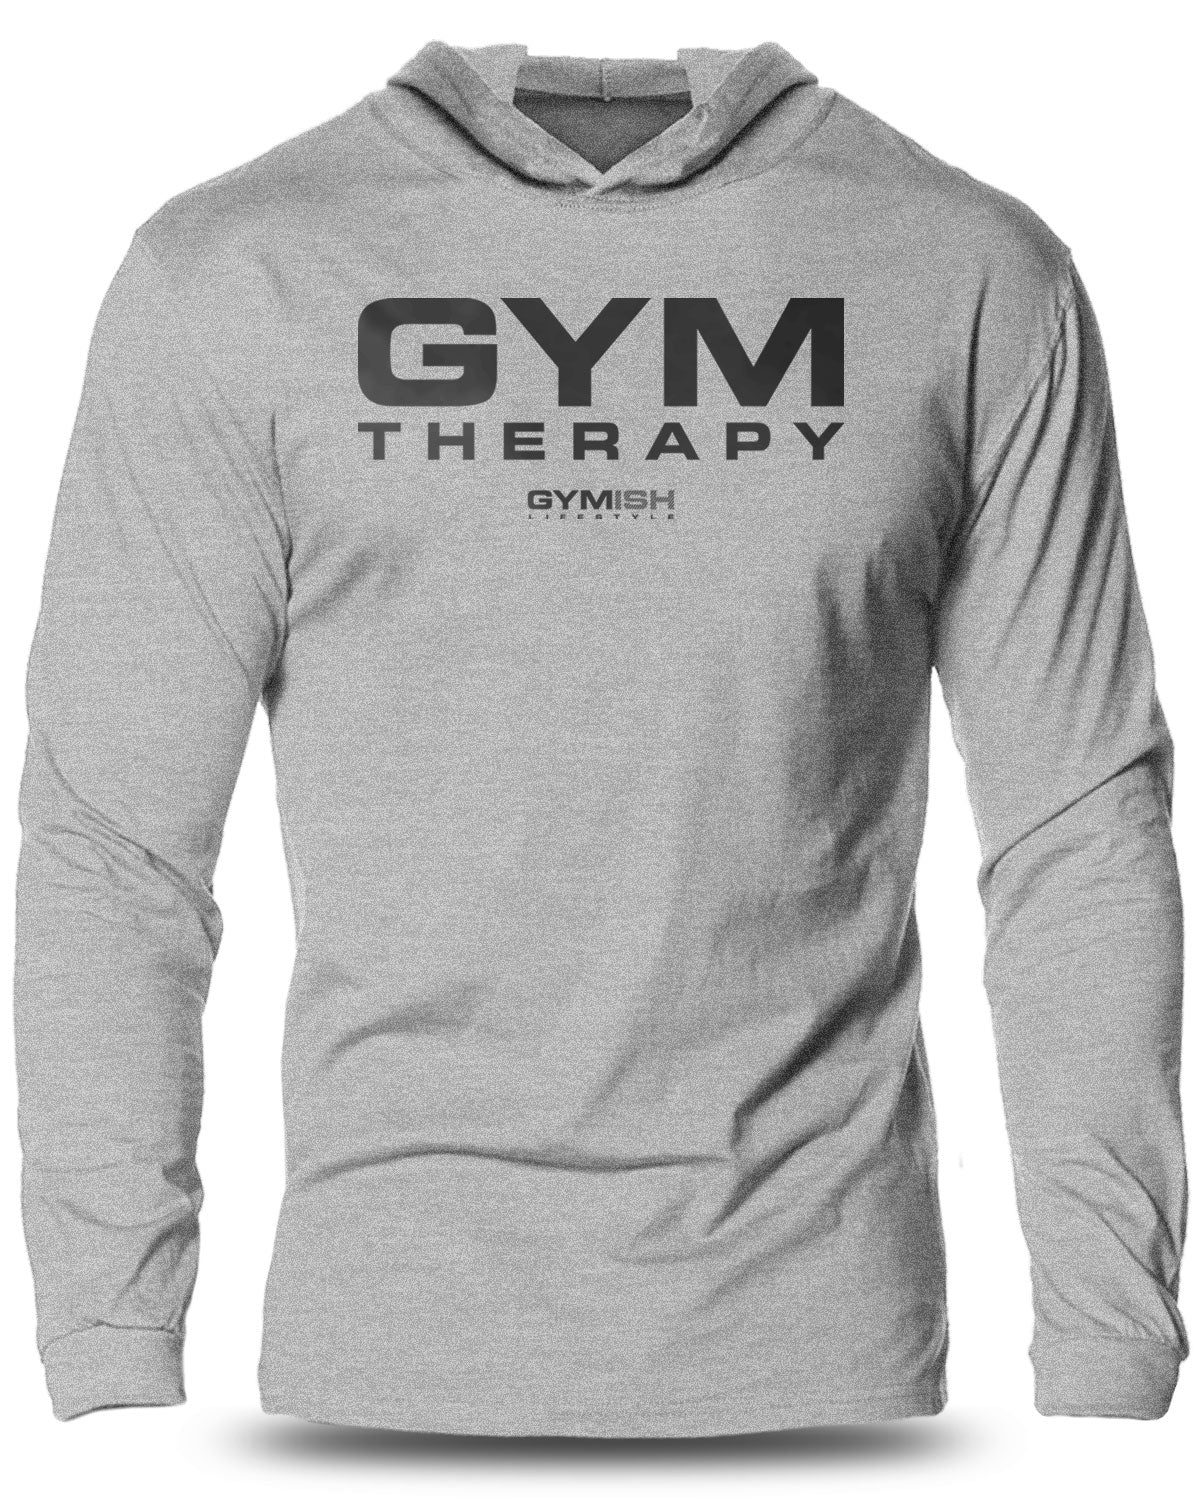 055- Gym Therapy Lightweight Long Sleeve Hooded T-shirt for Men